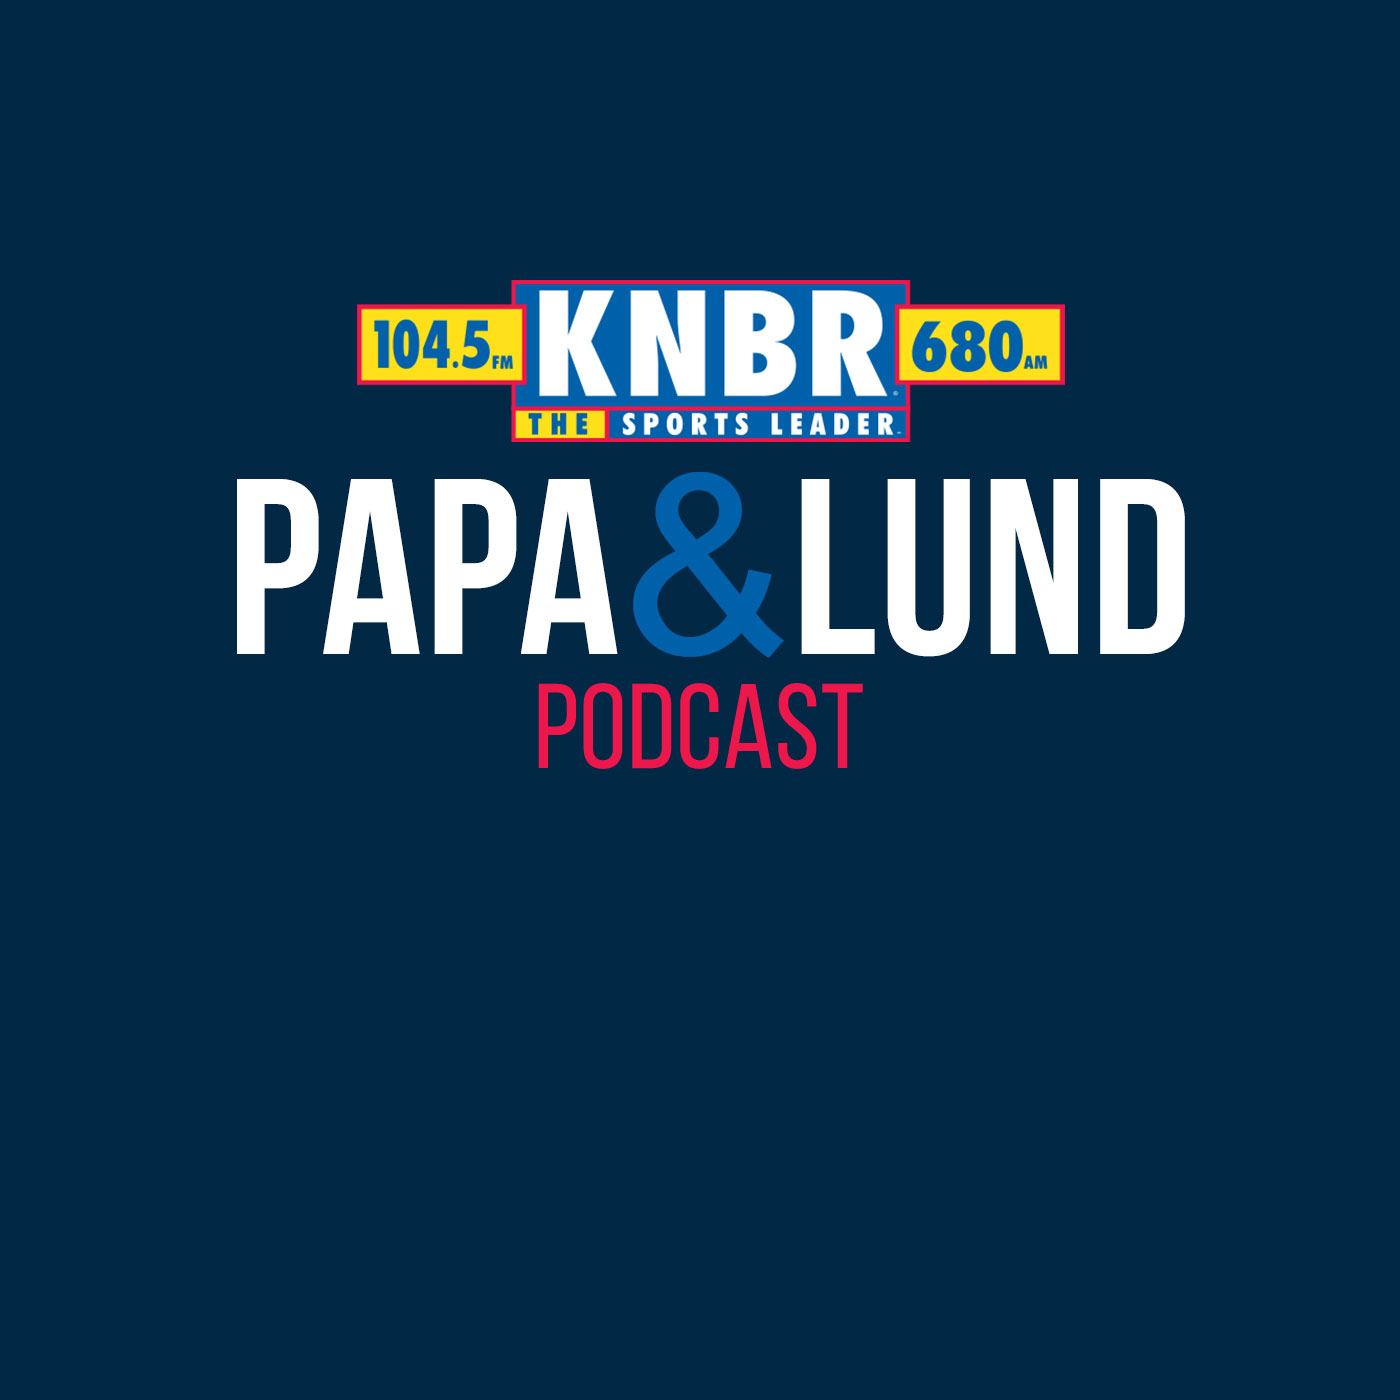 10-27 Kevin Frandsen joins Papa & Lund to preview the World Series between the Astros and Phillies